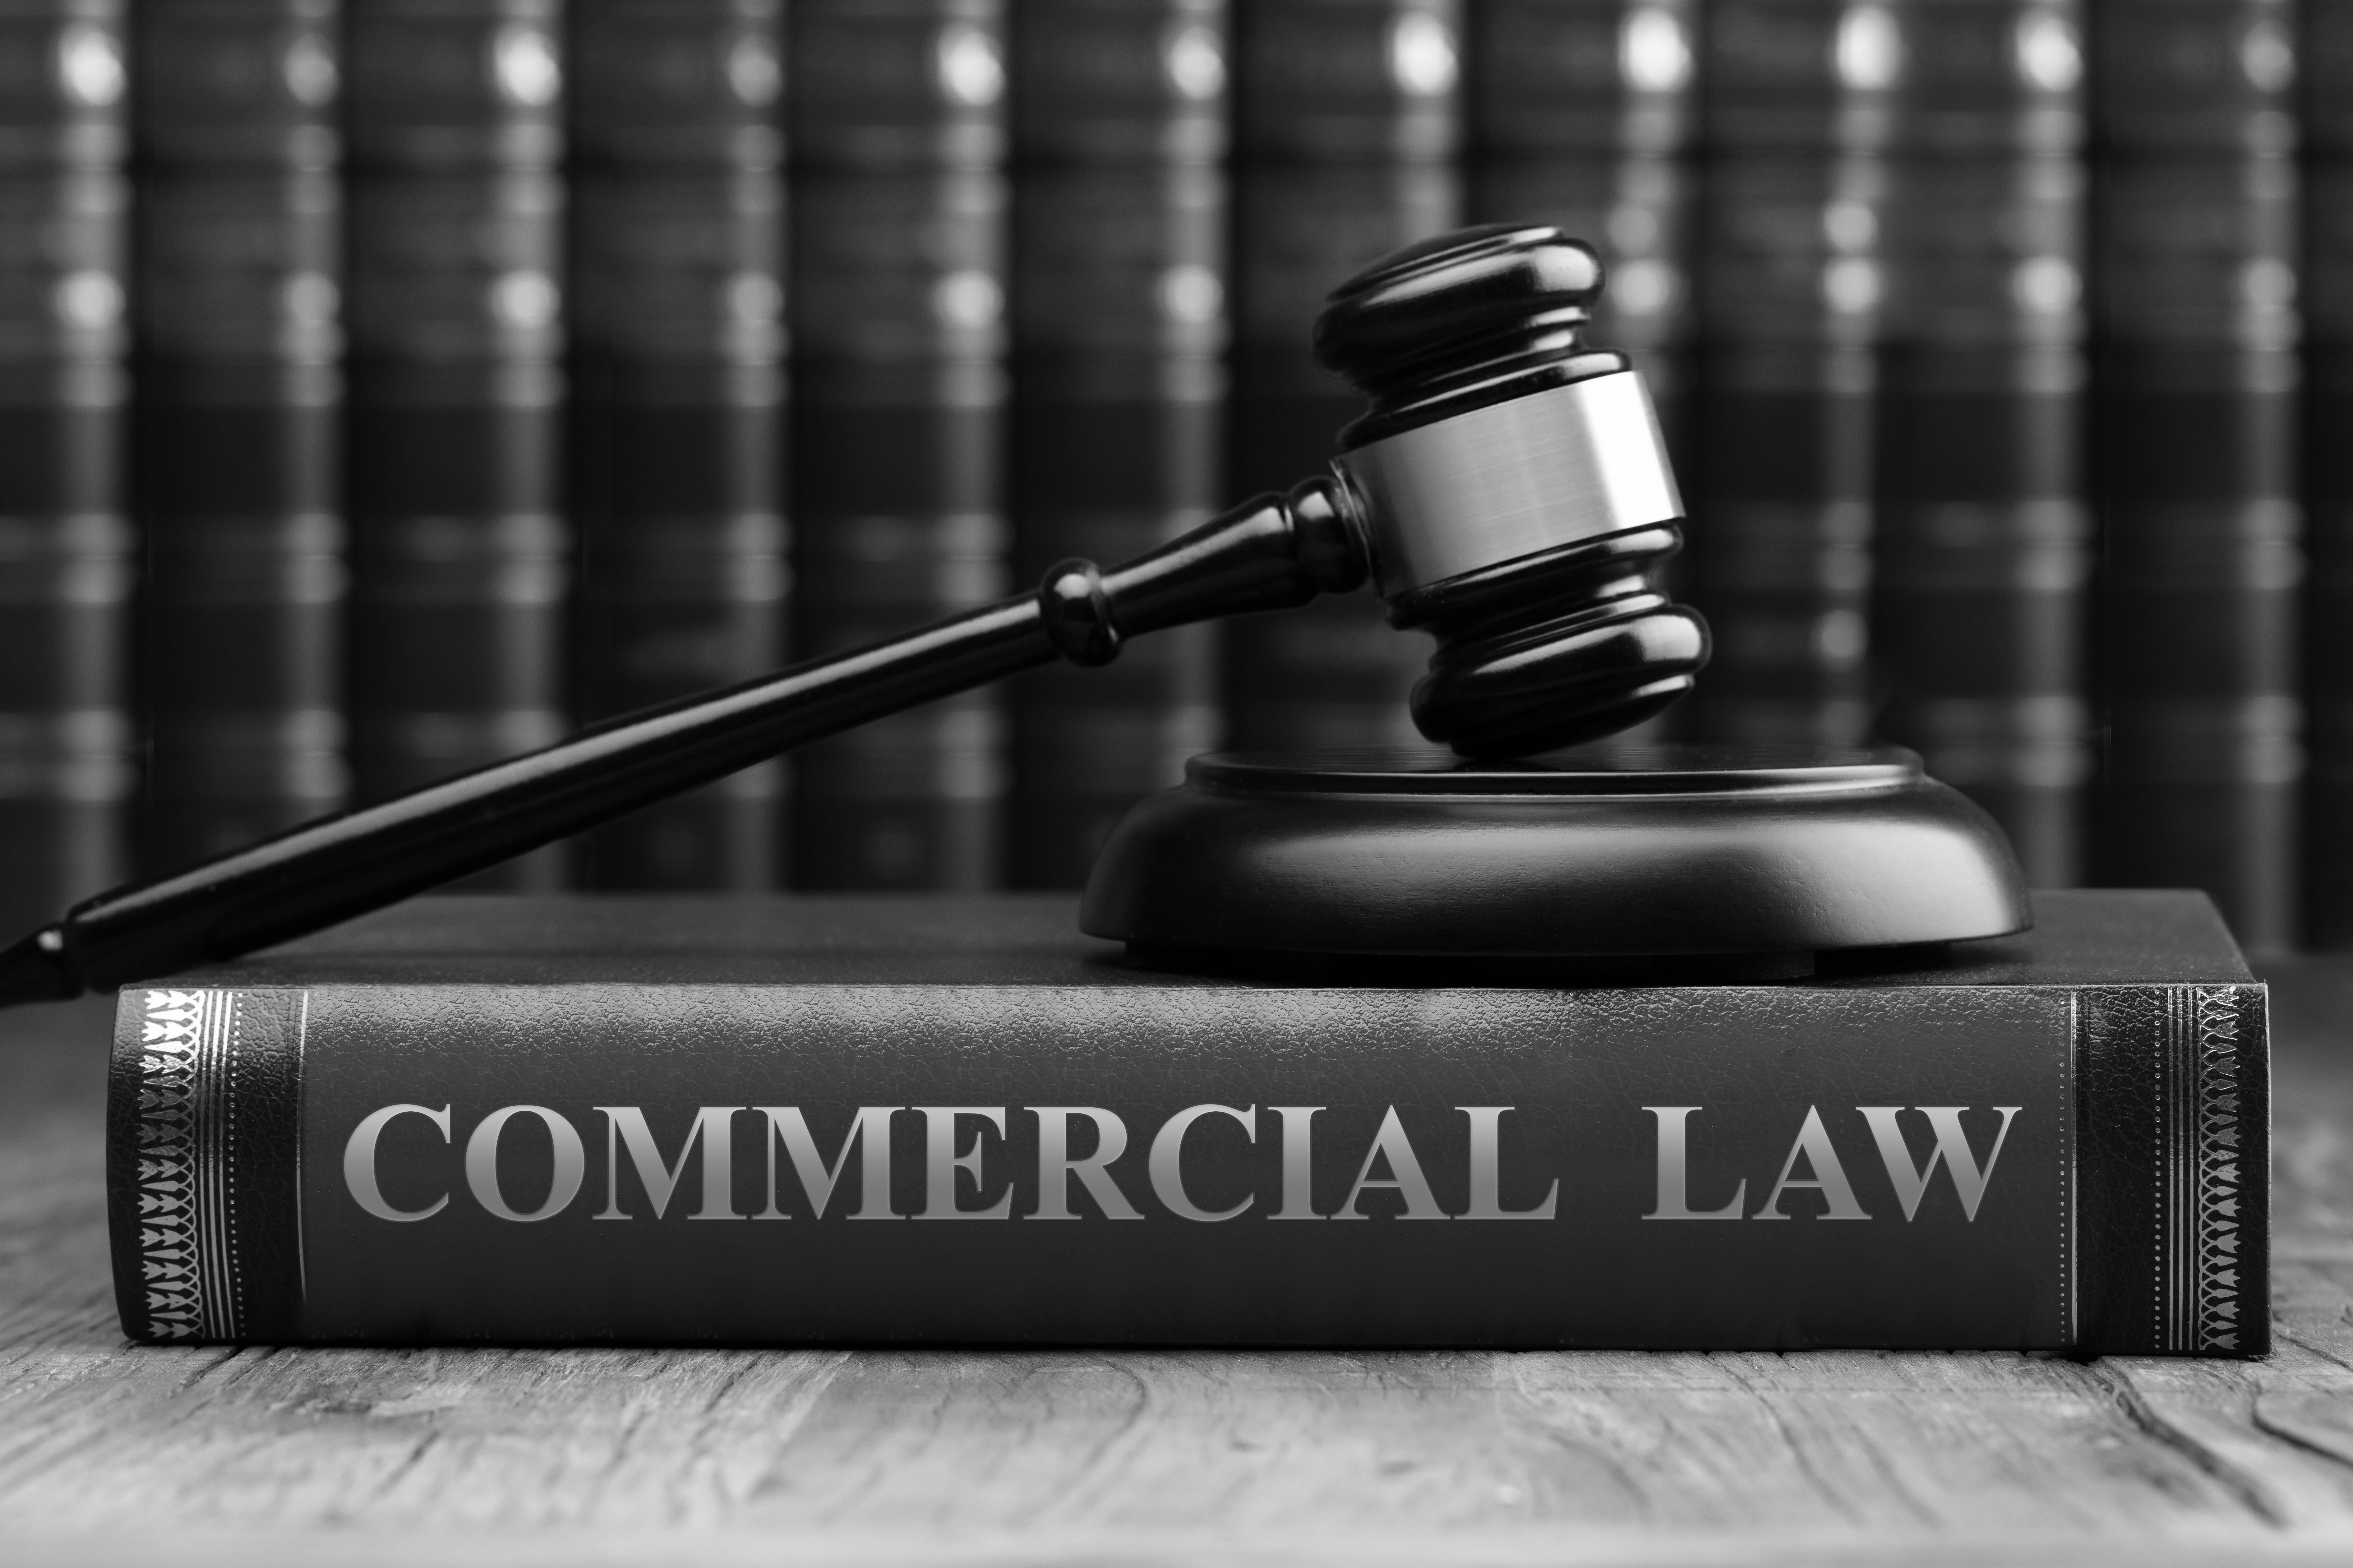 Tulsa, OK Commercial Law experts